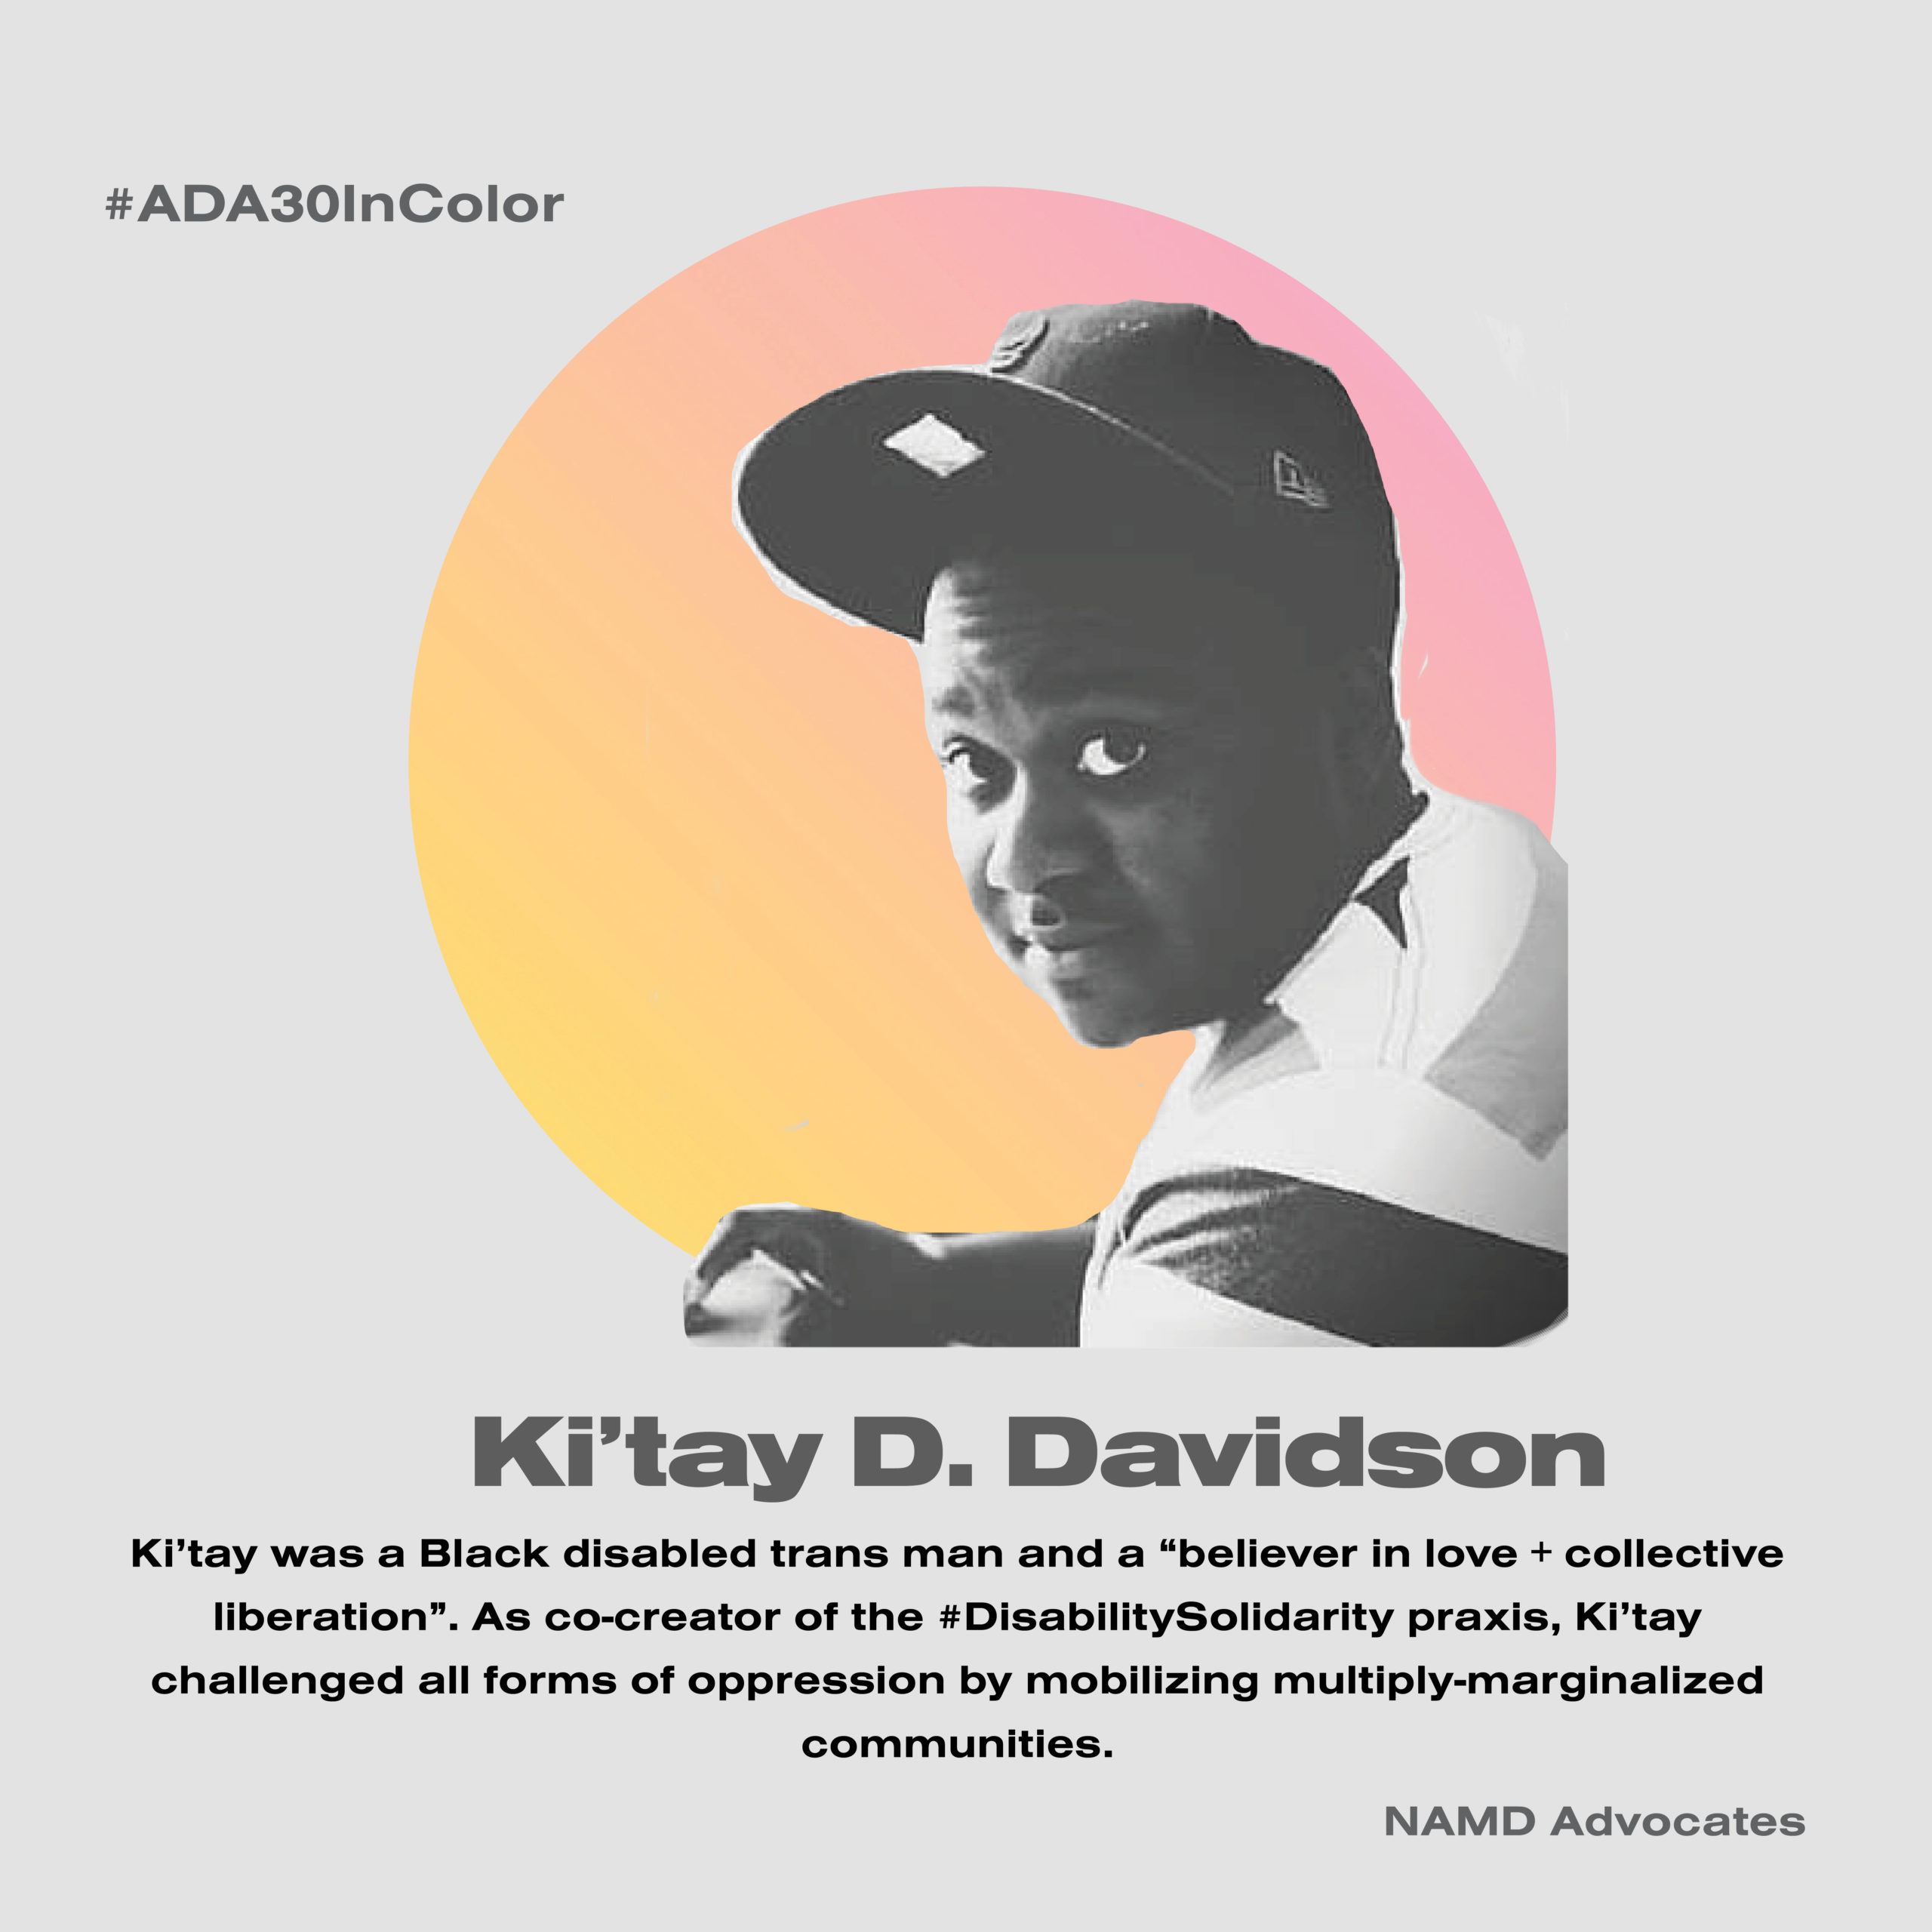 Ki'Tay D. Davidson. Ki'tay was a Black disabled trans man and a "believer in love + collective liberation." As co-creator of the #DisabilitySolidarity praxis, Ki'Tay challenged all forms of oppression by mobilizing multiply marginalized communities.